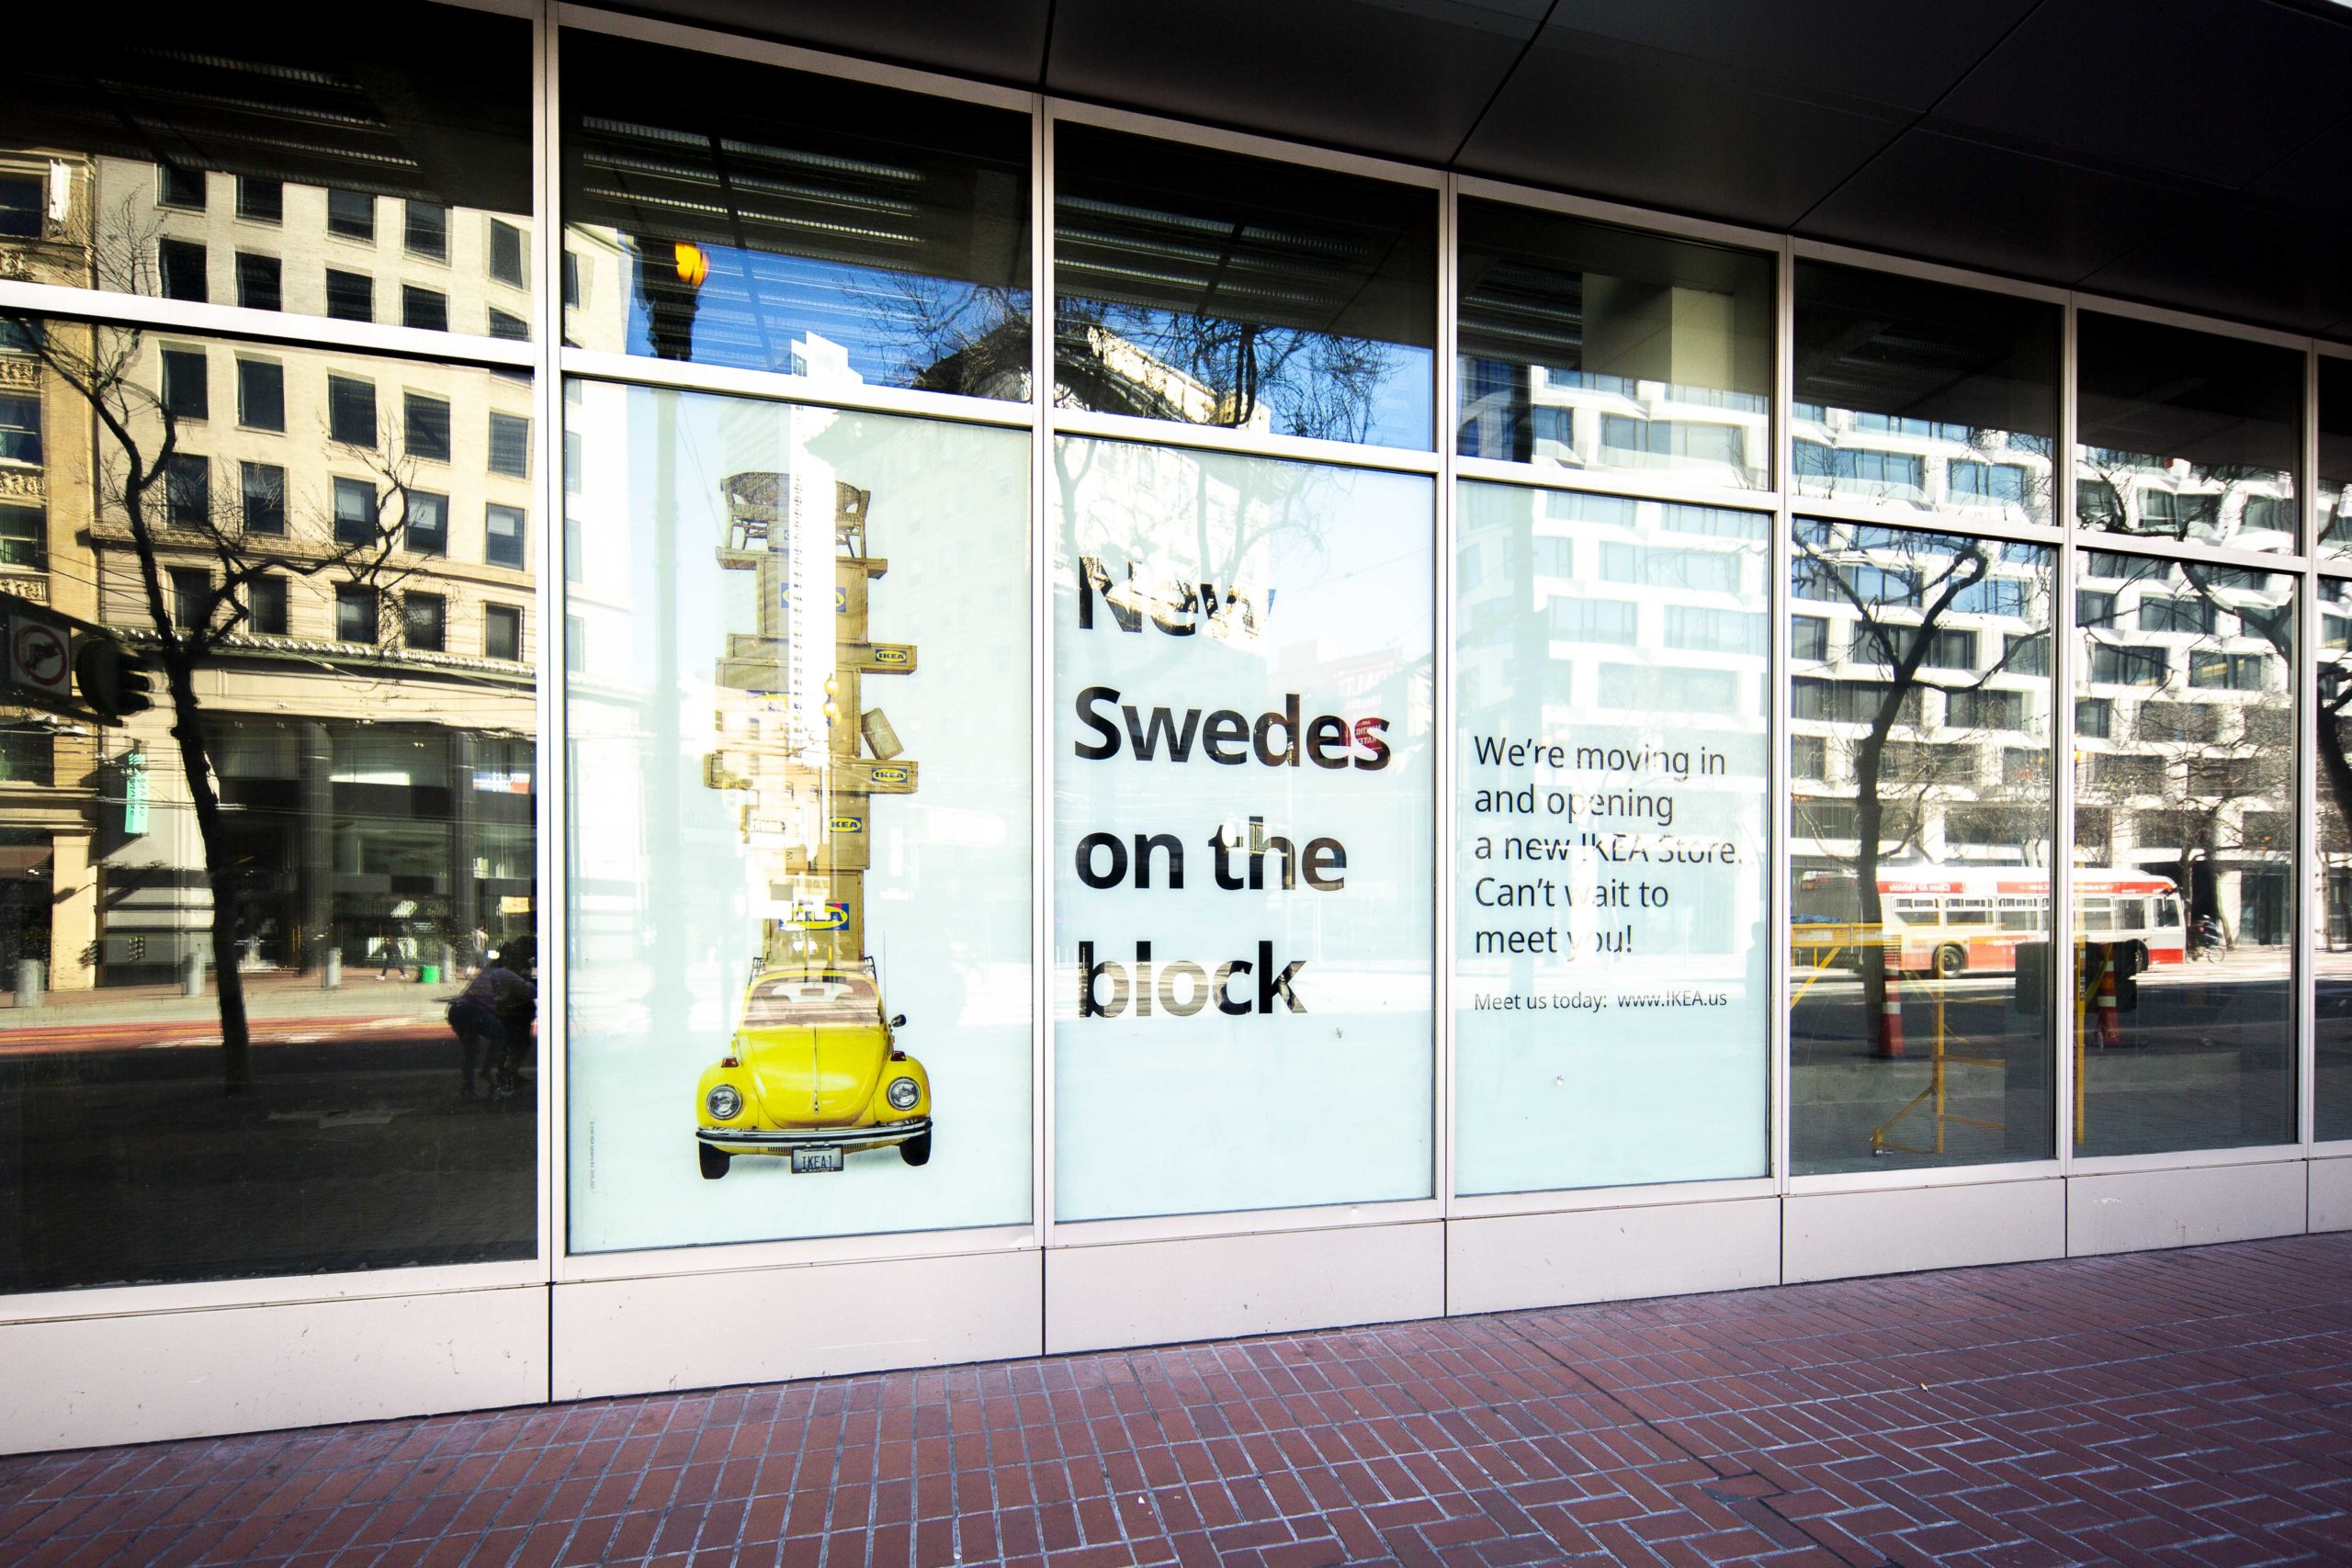 IKEA sign up at 945 Market Street, image by the author